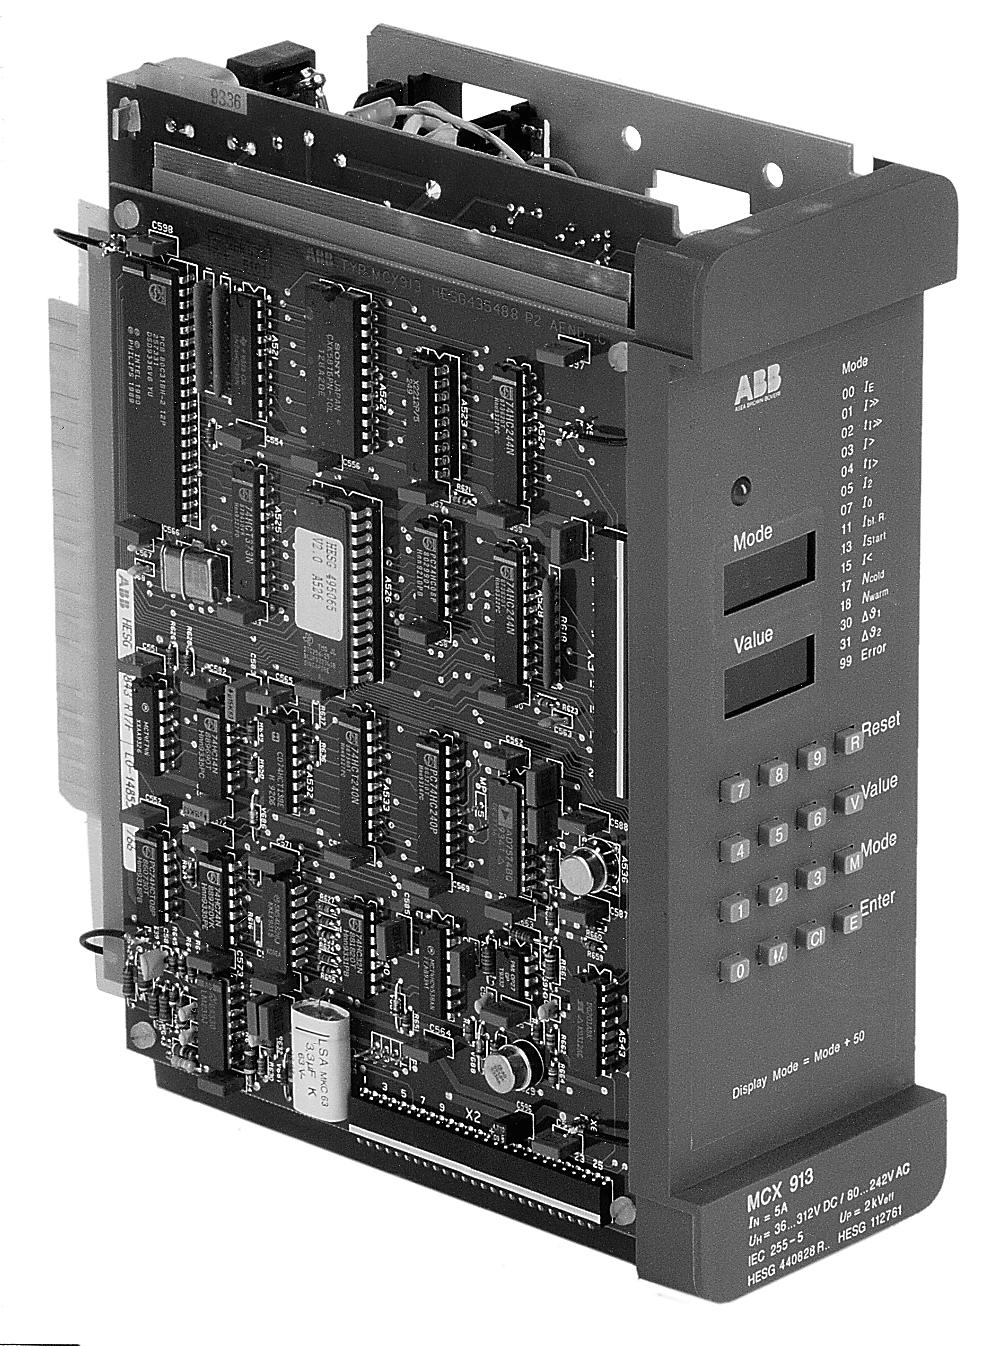 Multifunctional relay Page 1 Issued: July 1998 Changed: since April 1989 Data subject to change without notice Features Plug-in microprocessor controlled multifuncional relay with automatic shorting